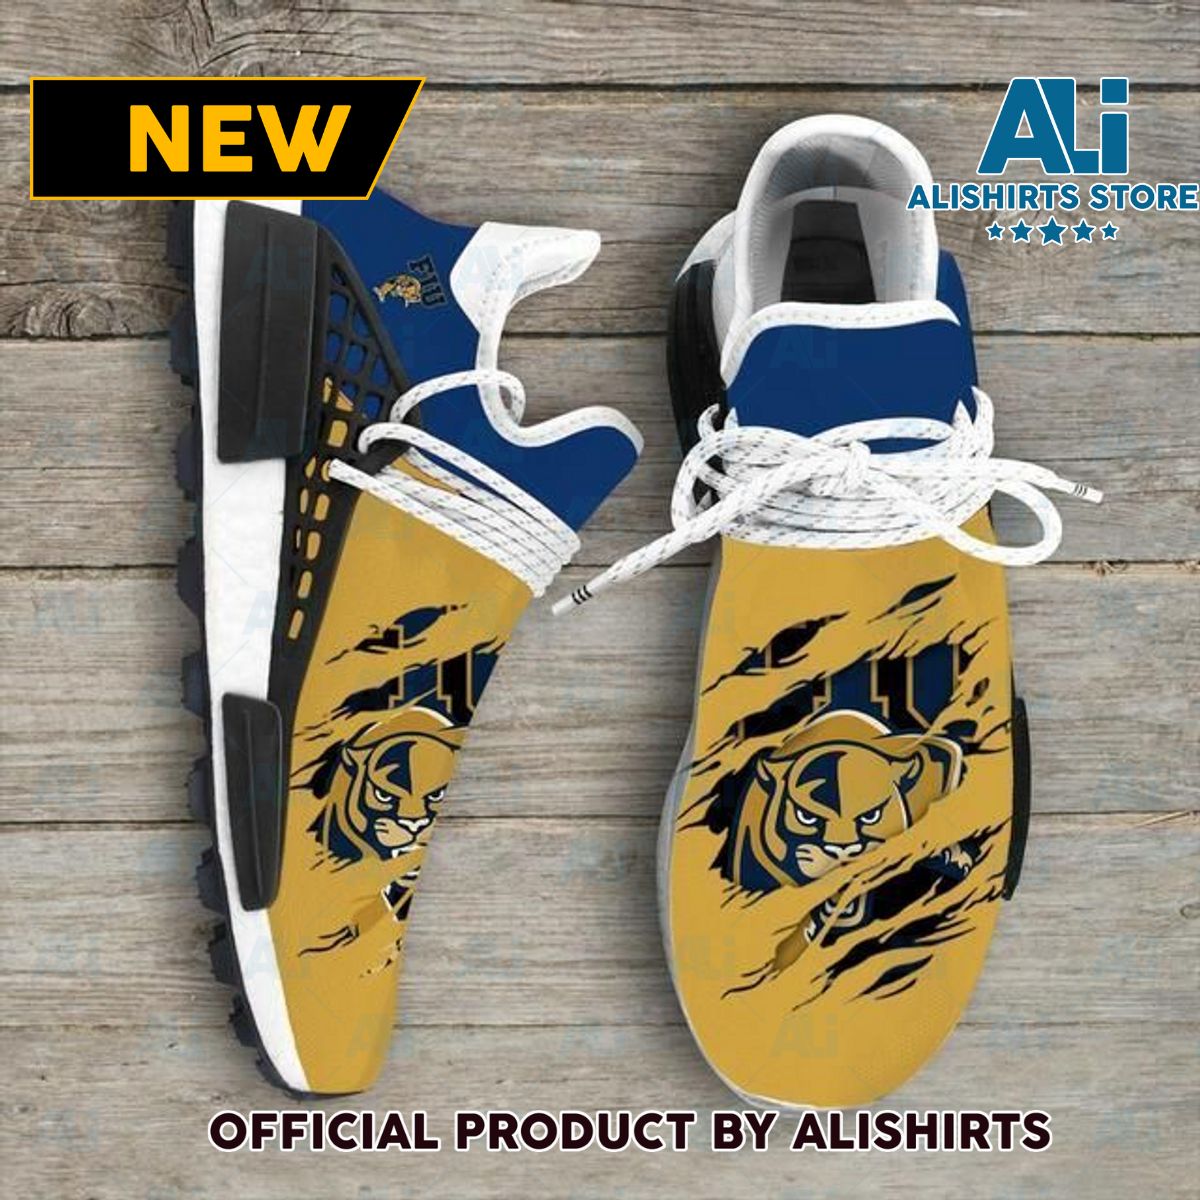 Fiu Panthers Ncaa NMD Human Race shoes Adidas NMD Sneakers